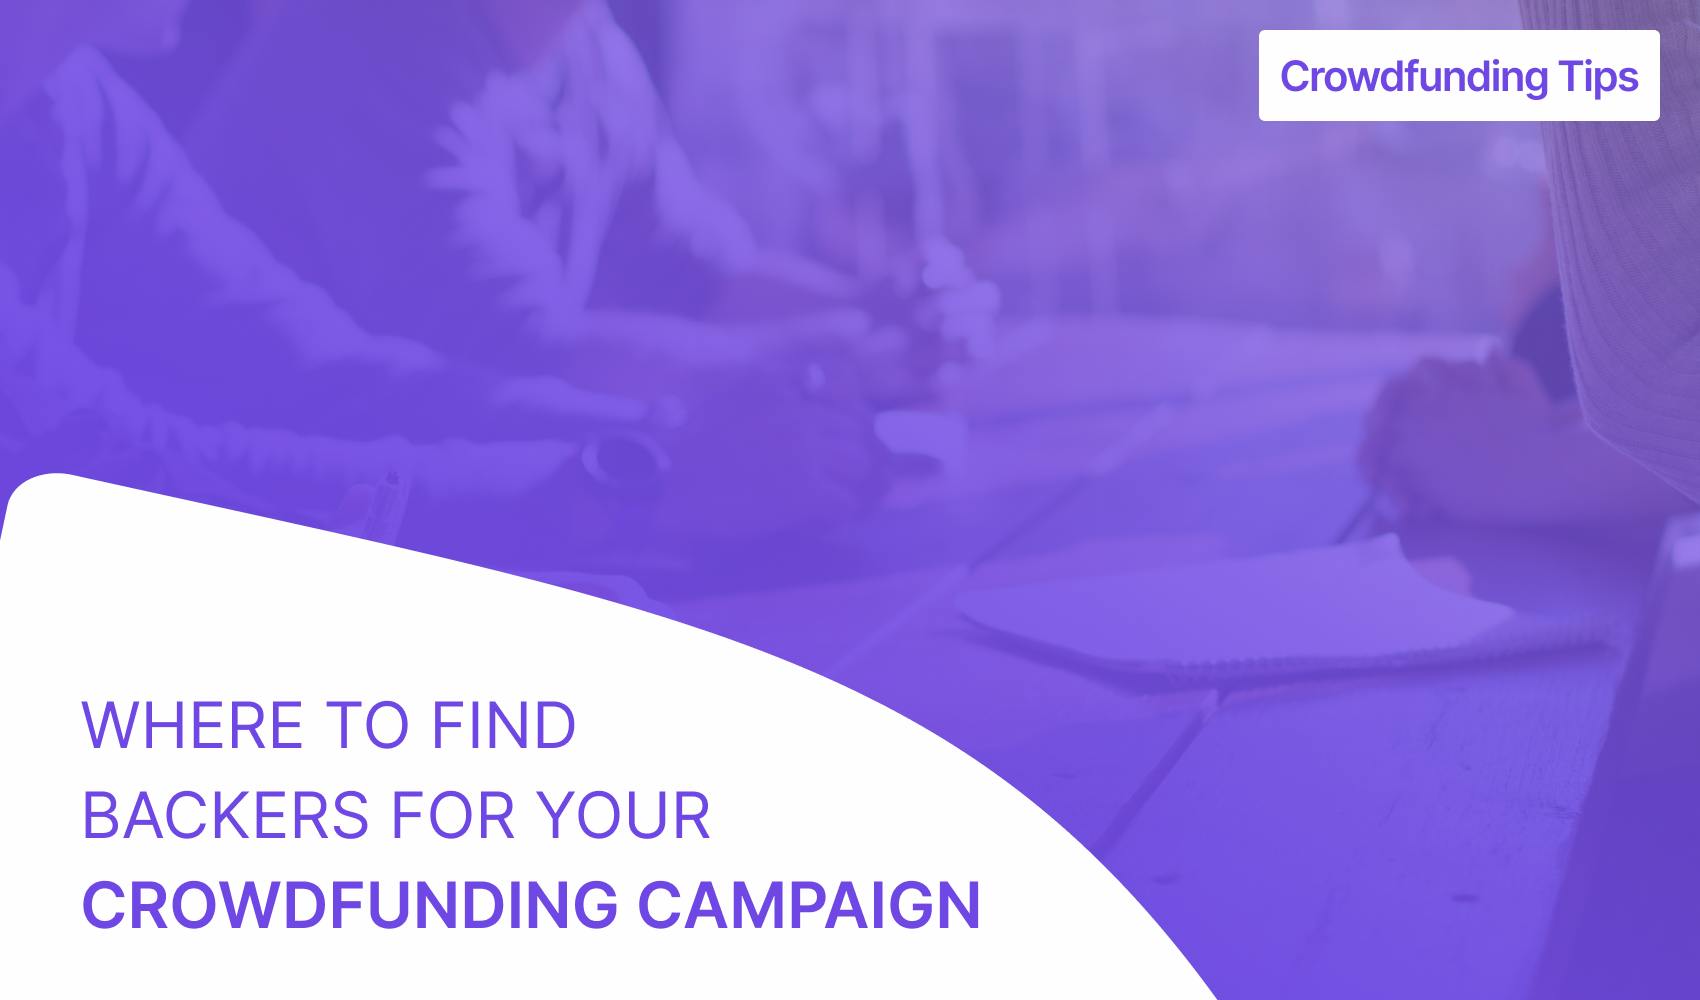 How to find backers for your crowdfunding campaign